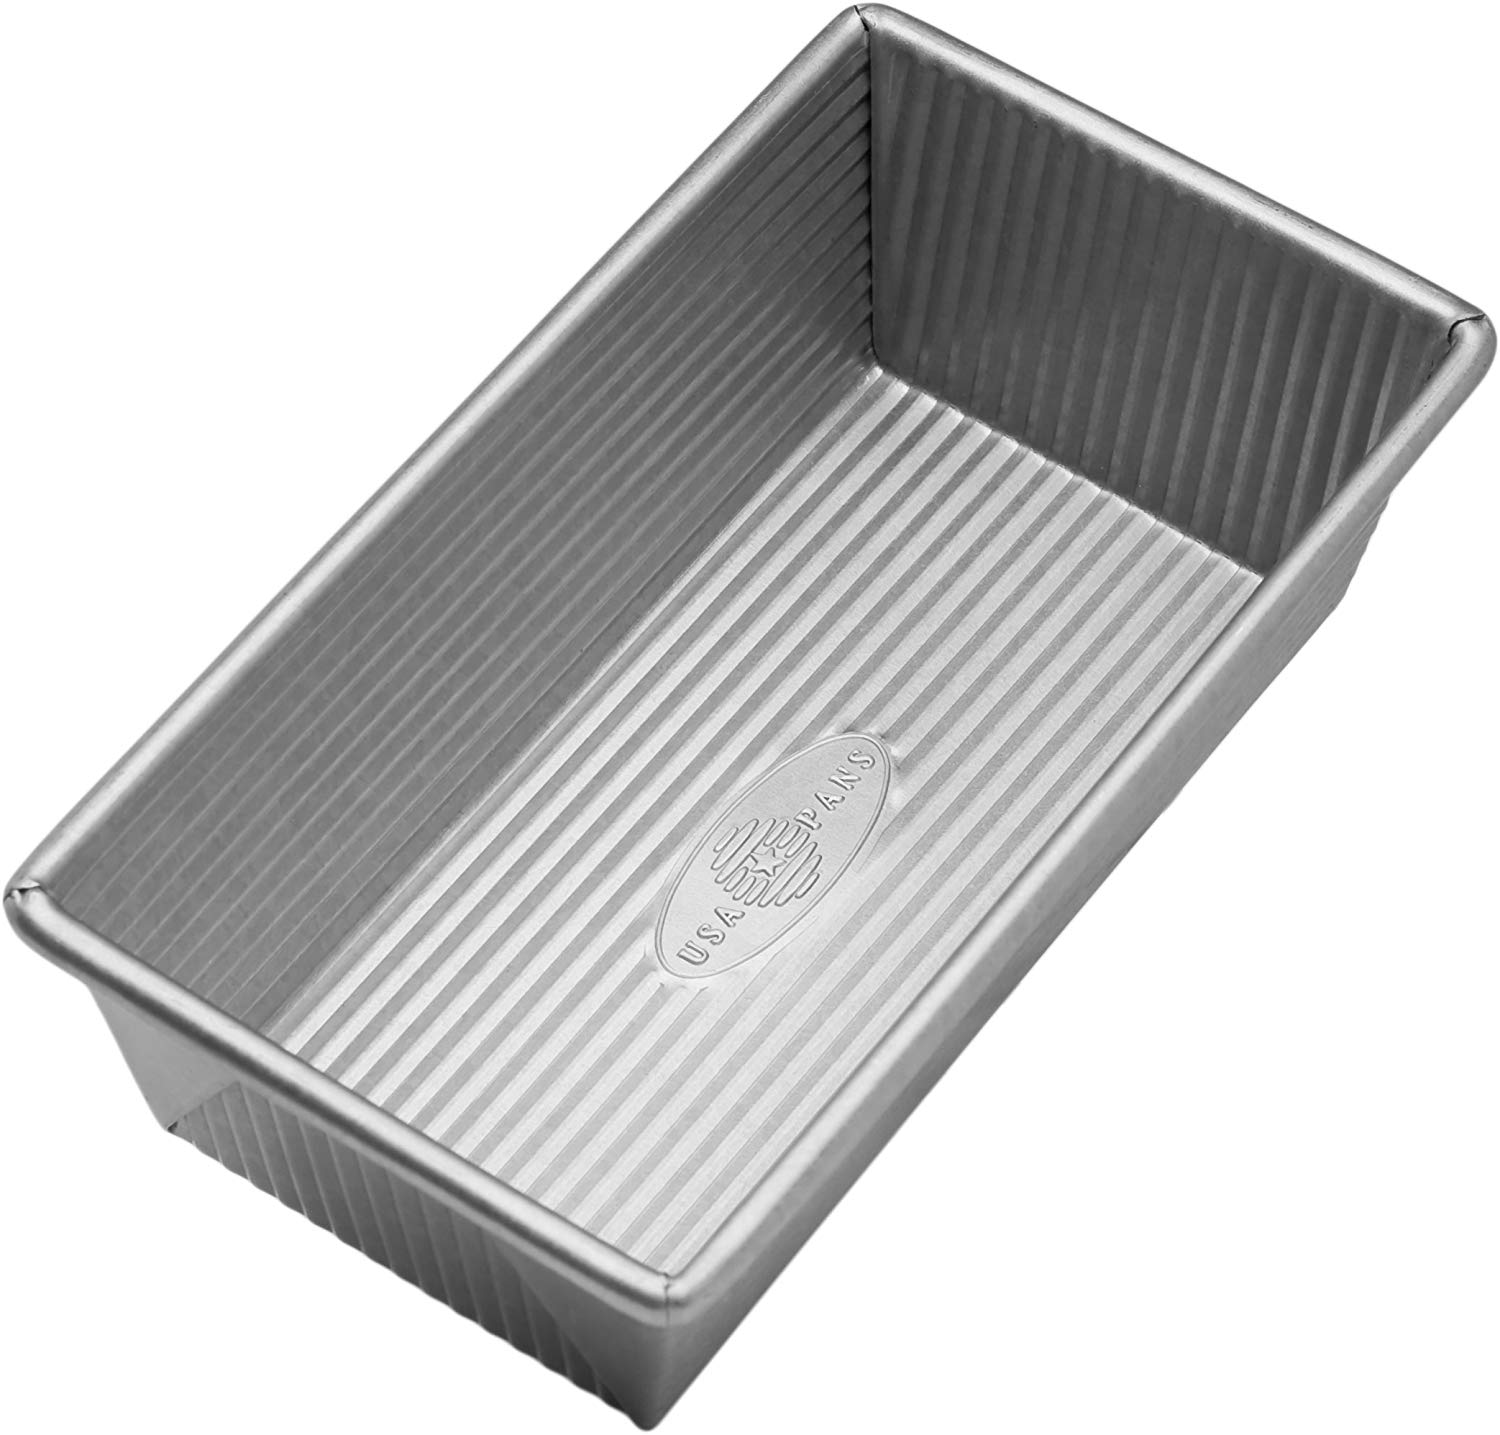 USA Pan Steel Bakeware Bread And Loaf Pan